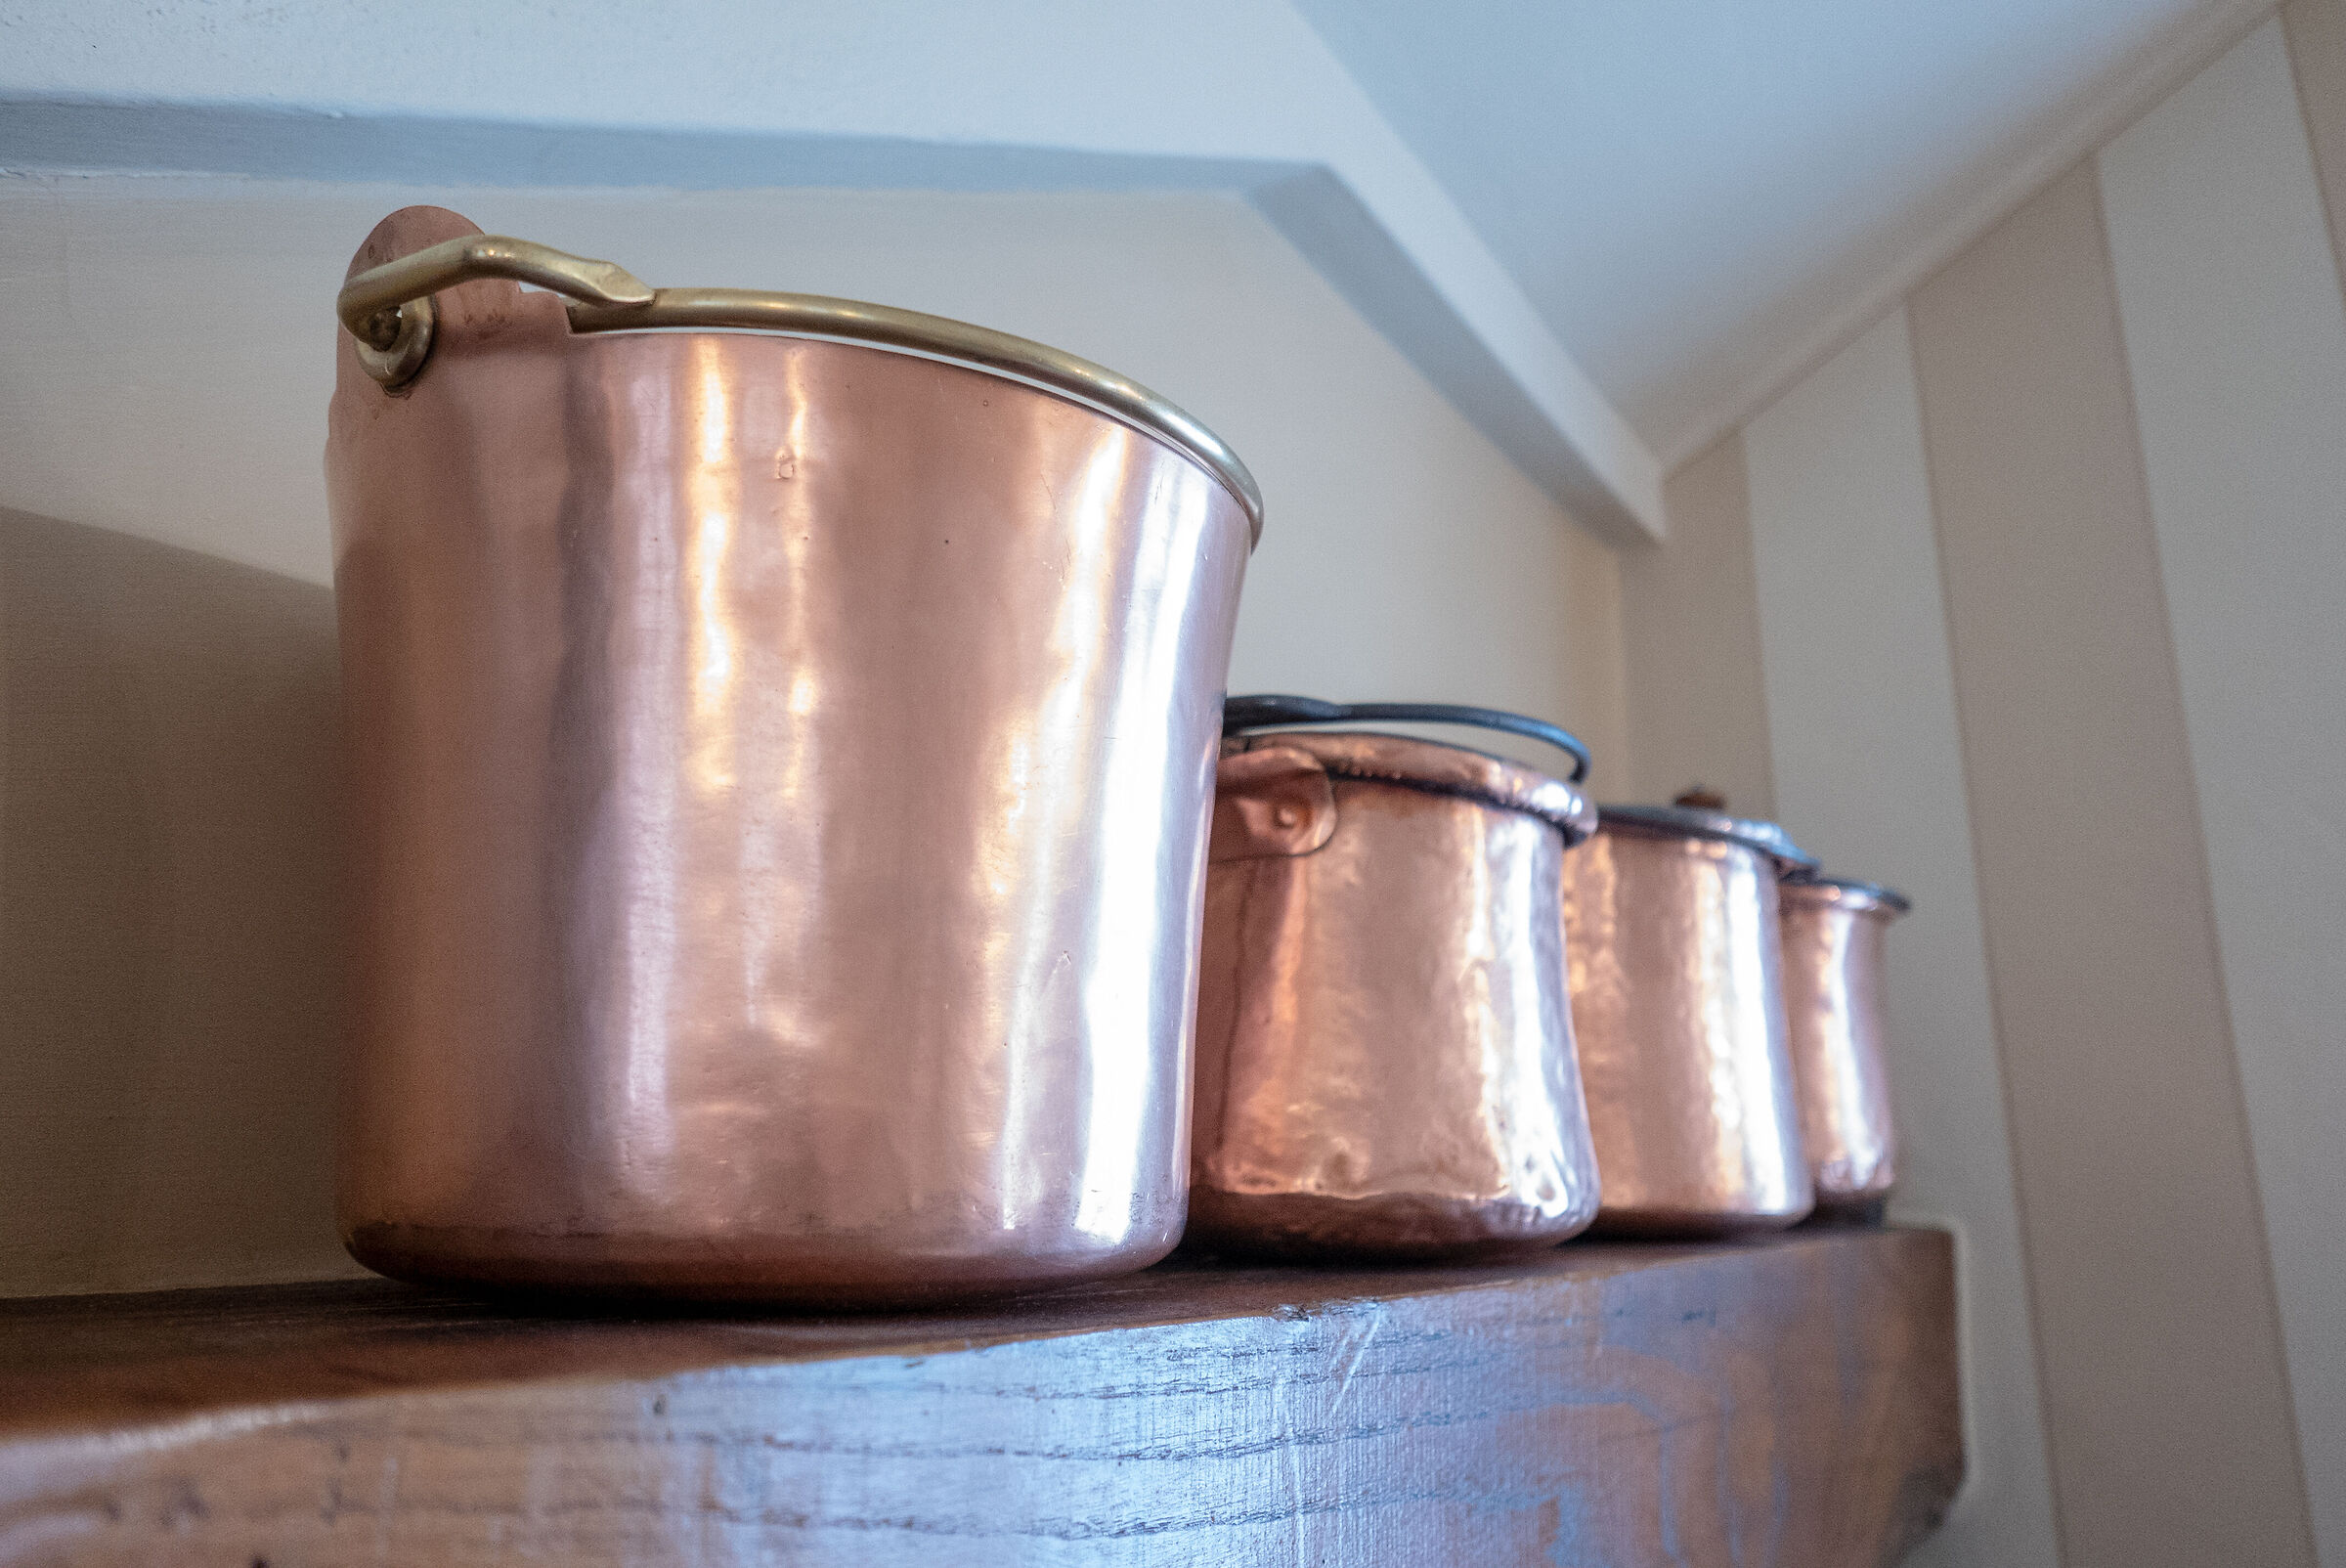 Once upon a time there was the copper pot...